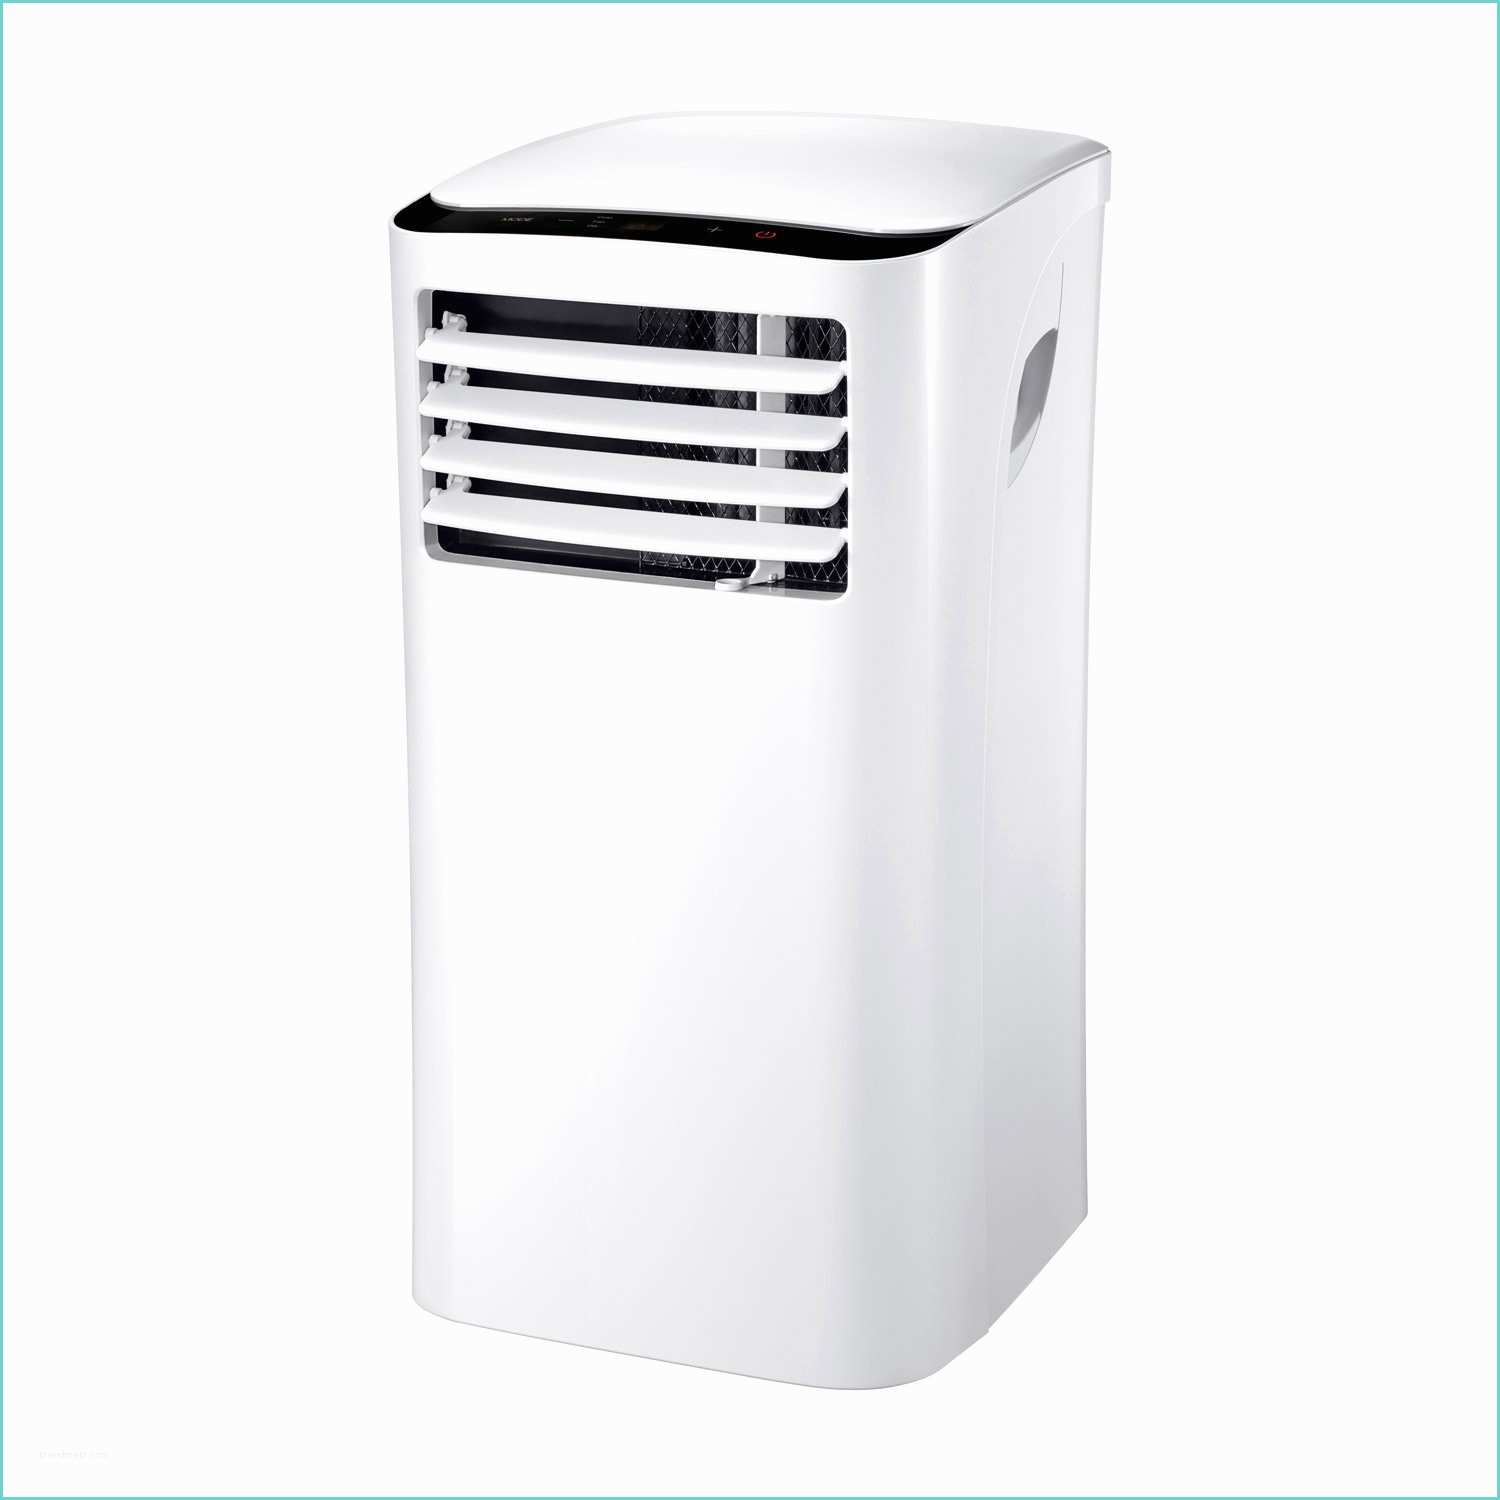 Climatiseur Mobile Leroy Merlin Climatiseur Mobile Equation Glossy 2600 W